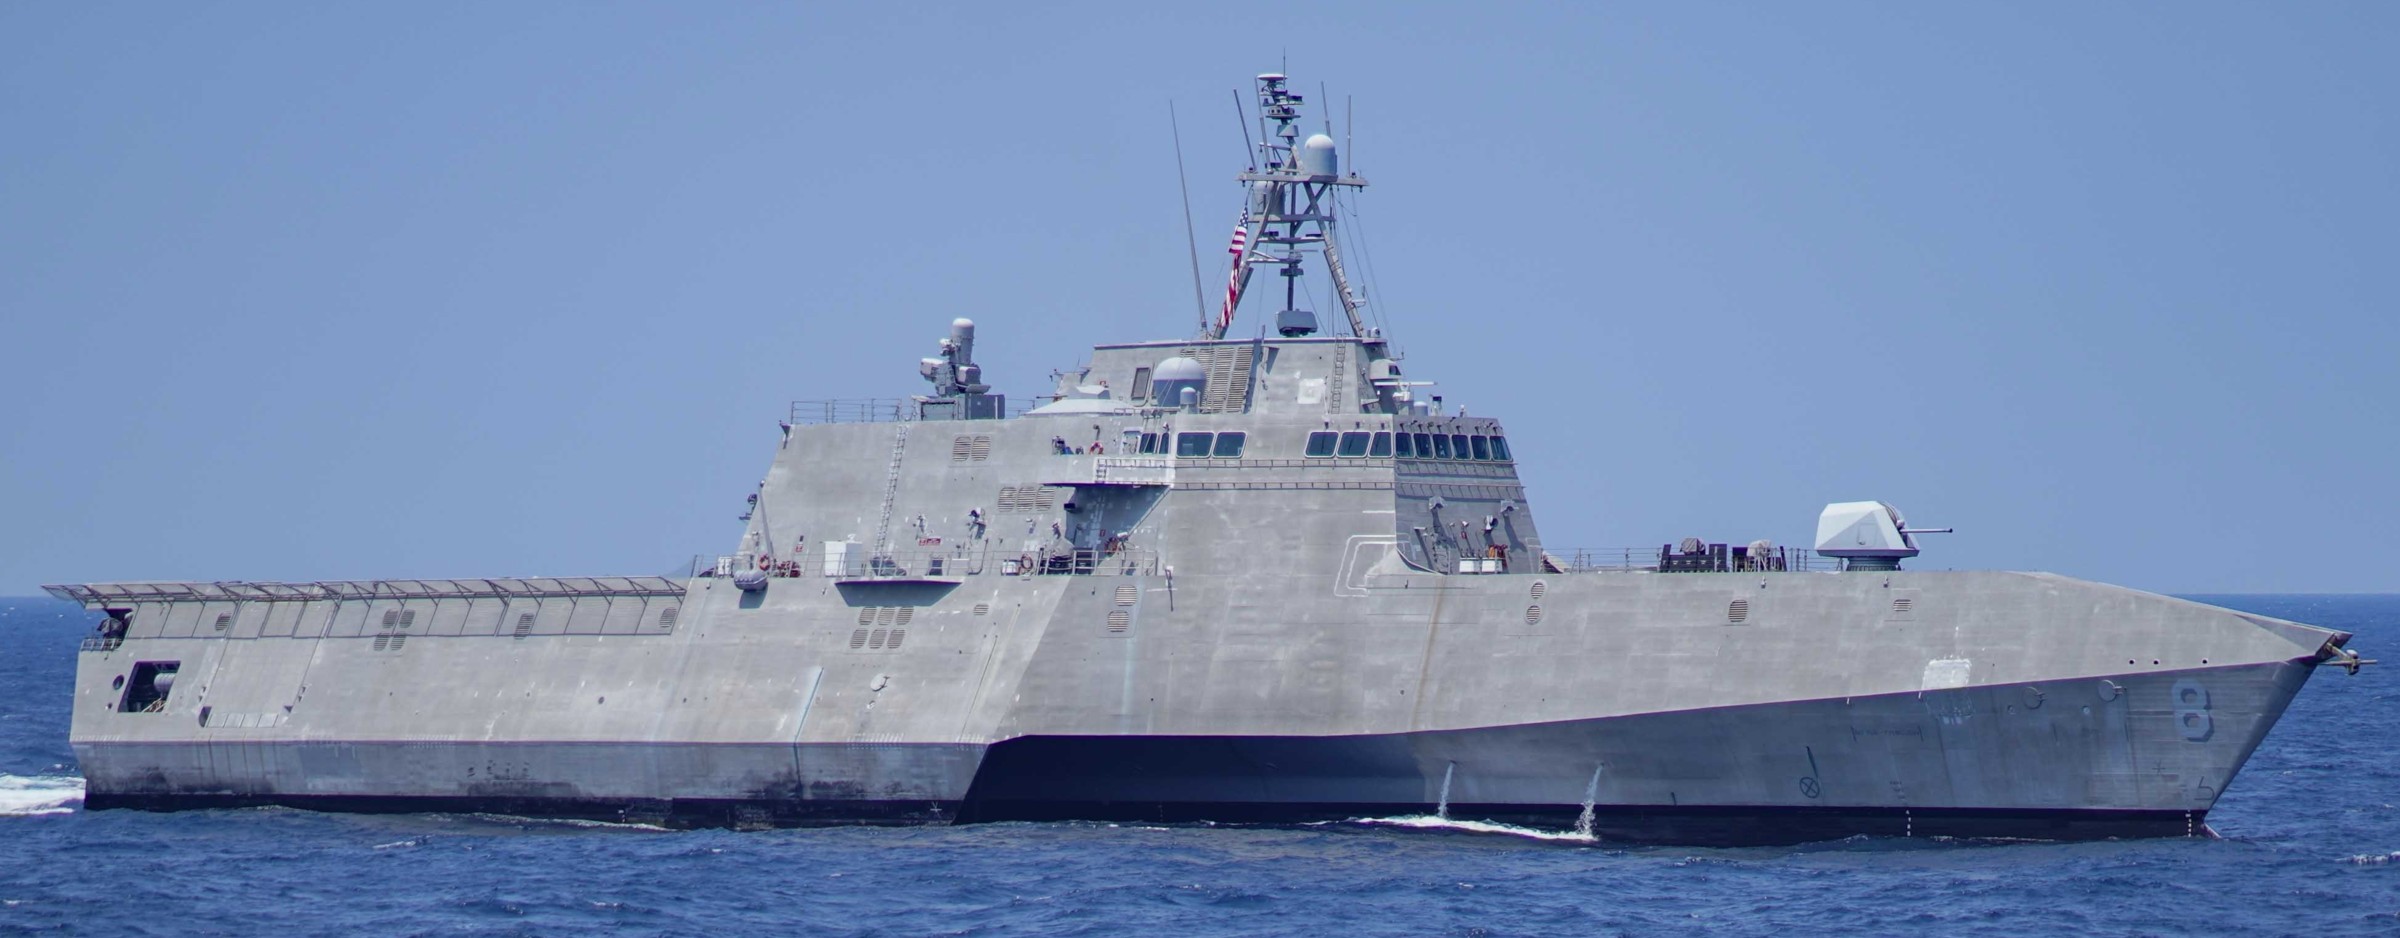 lcs-8 uss montgomery independence class littoral combat ship us navy aumx exercise